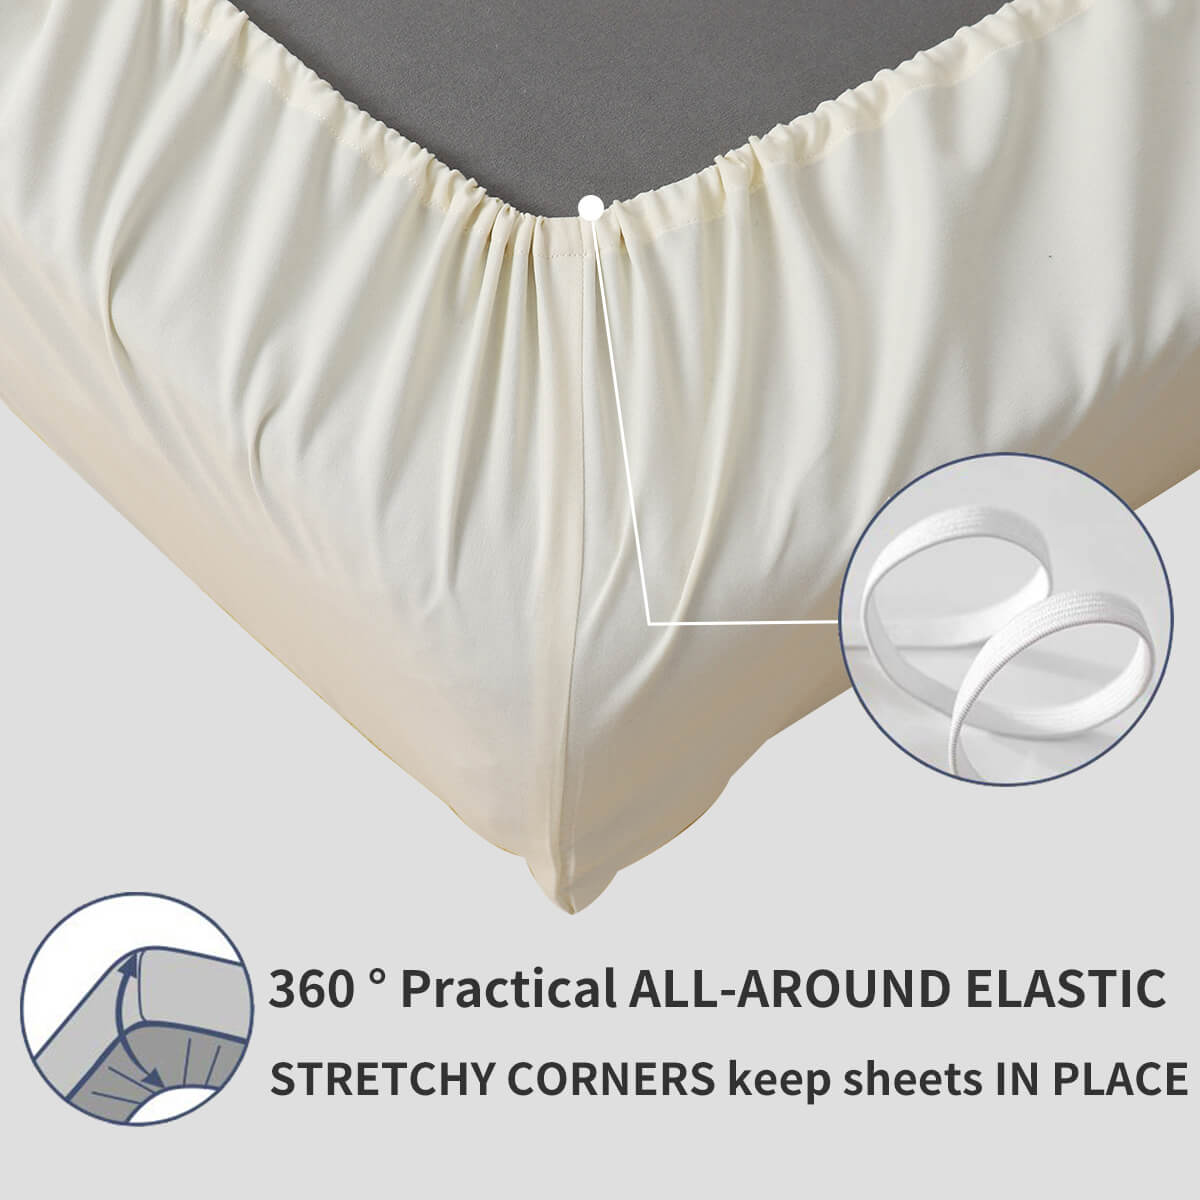 RKSB-0007 RUIKASI Fitted Sheets Double Bed Extra Deep (135 x 190 + 40 cm) 100% Brushed Microfiber Bed Sheets, Ultra Soft Silky Smooth and Wrinkle-Resistant